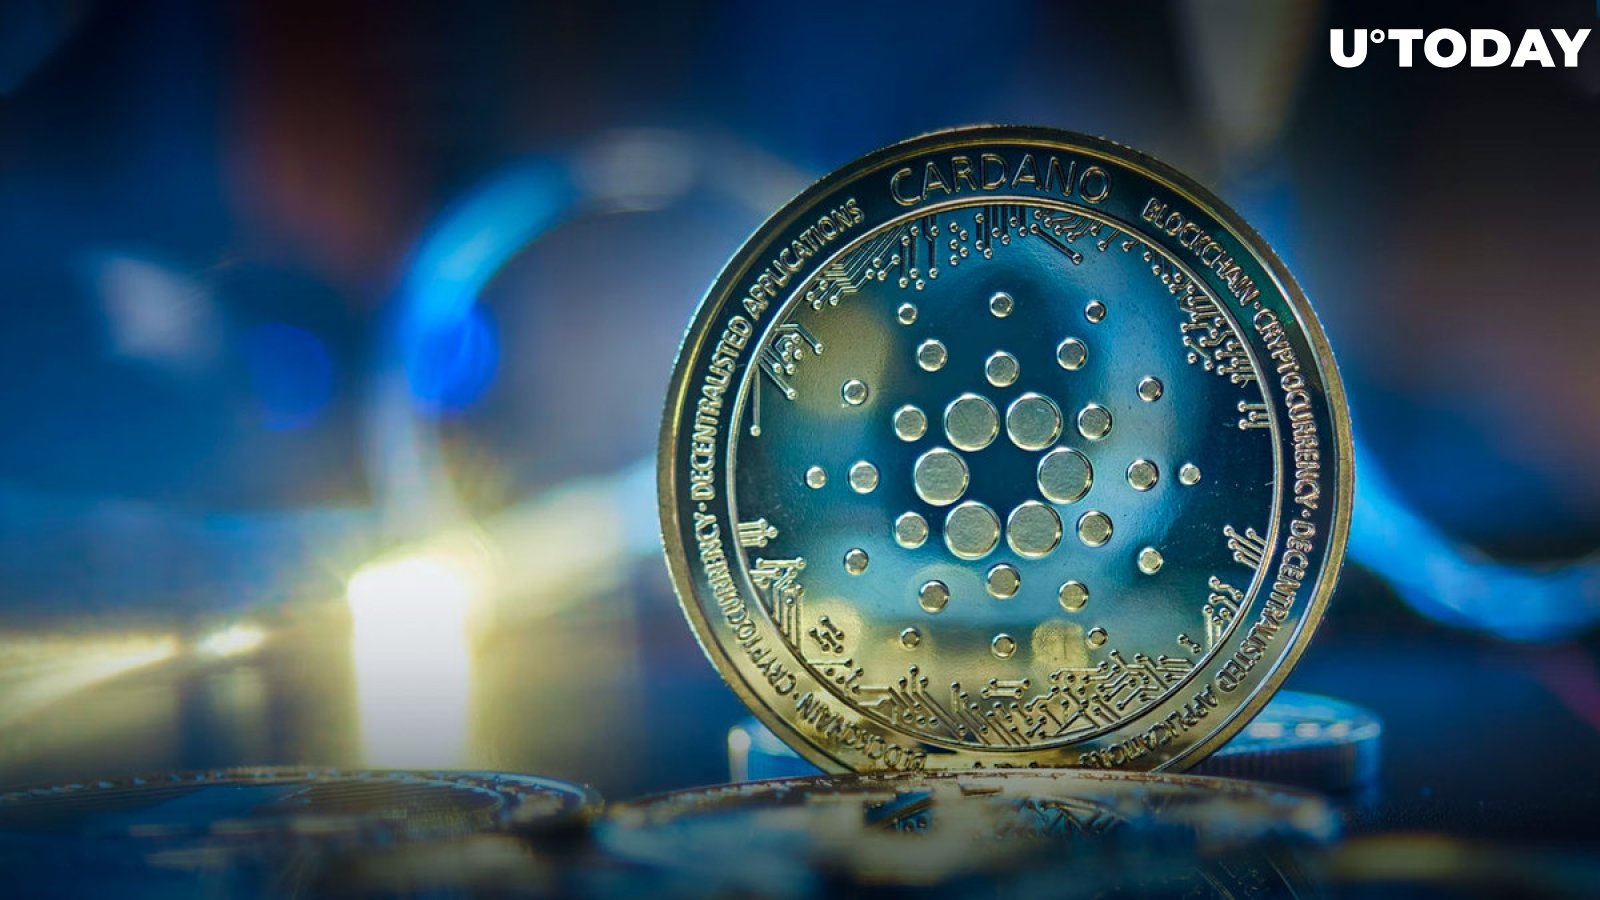 Cardano Reaches New Milestone: 1760 Days Without Outages